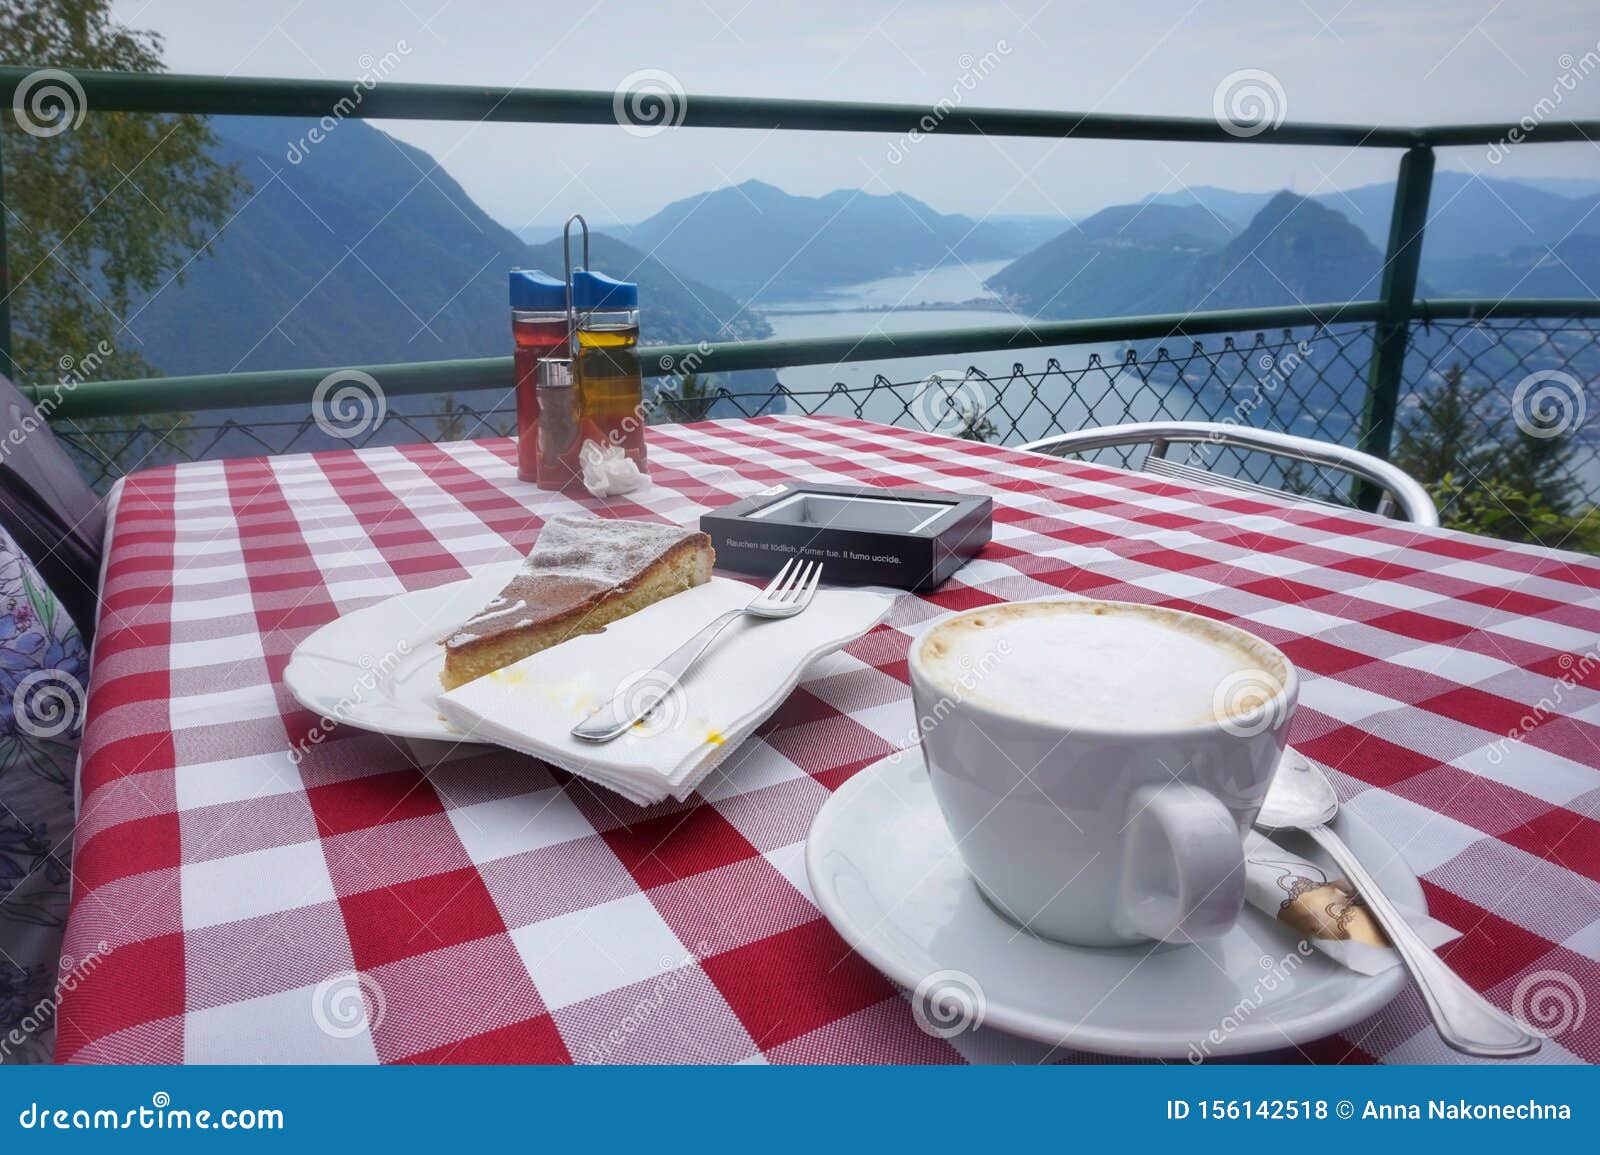 cup of coffee and lemon pie on the table. cafe on mount monte bre.